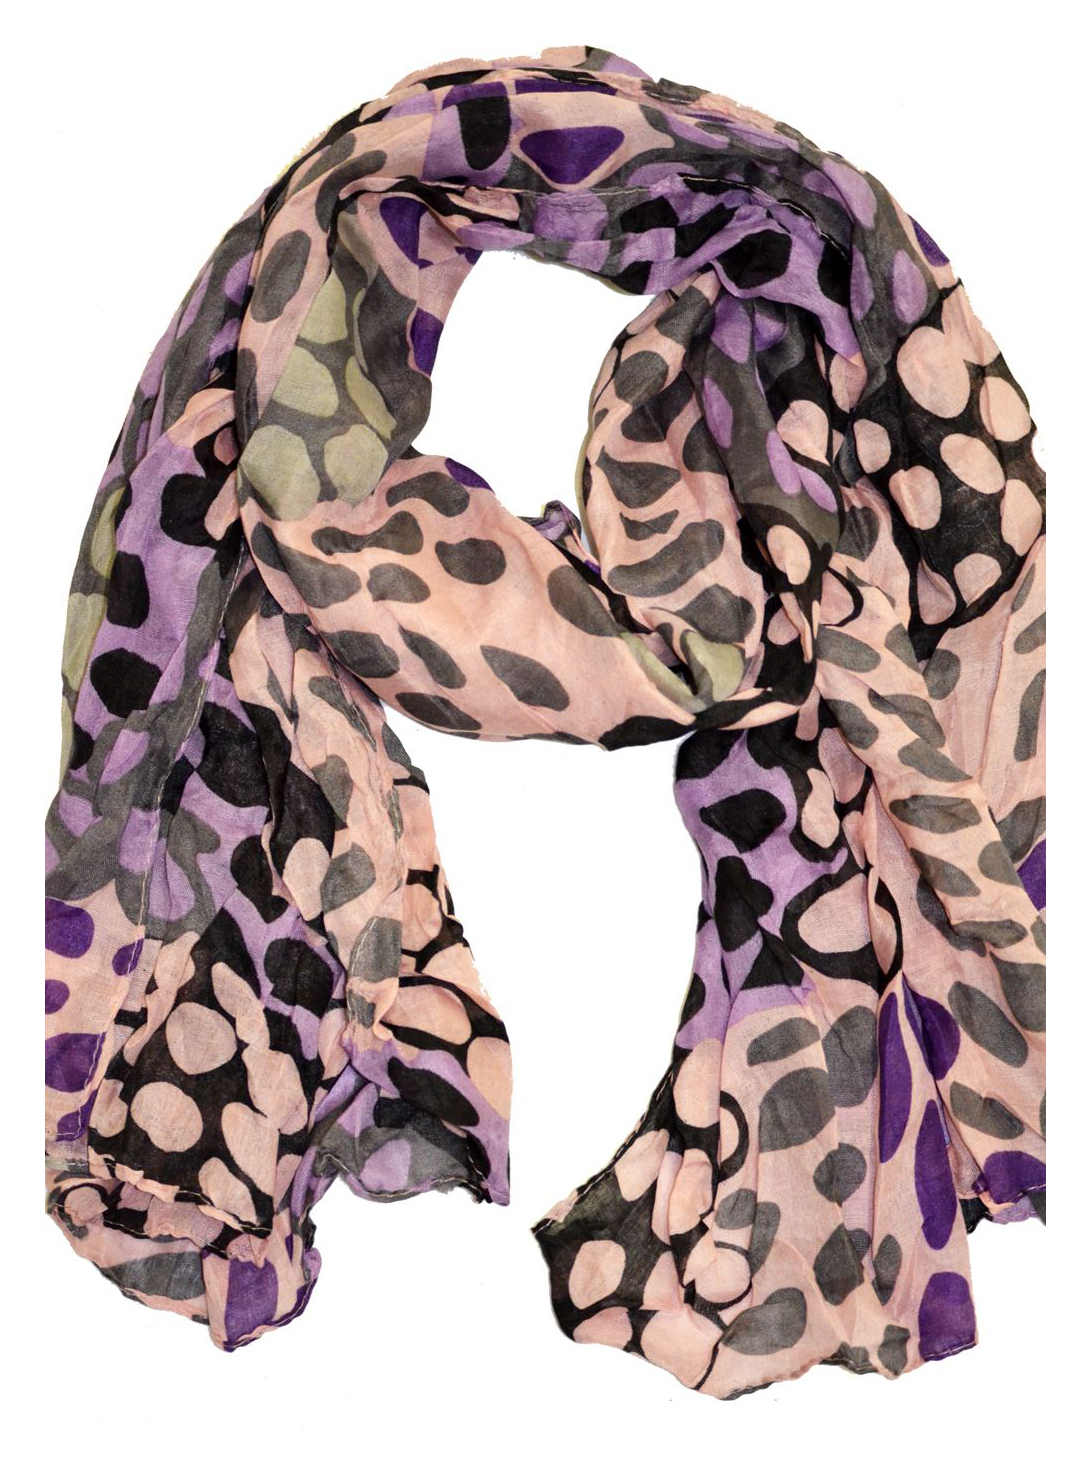 Belle Donne- Women's Sheer Spotted Multicolor Scarf -Spotted Mauve